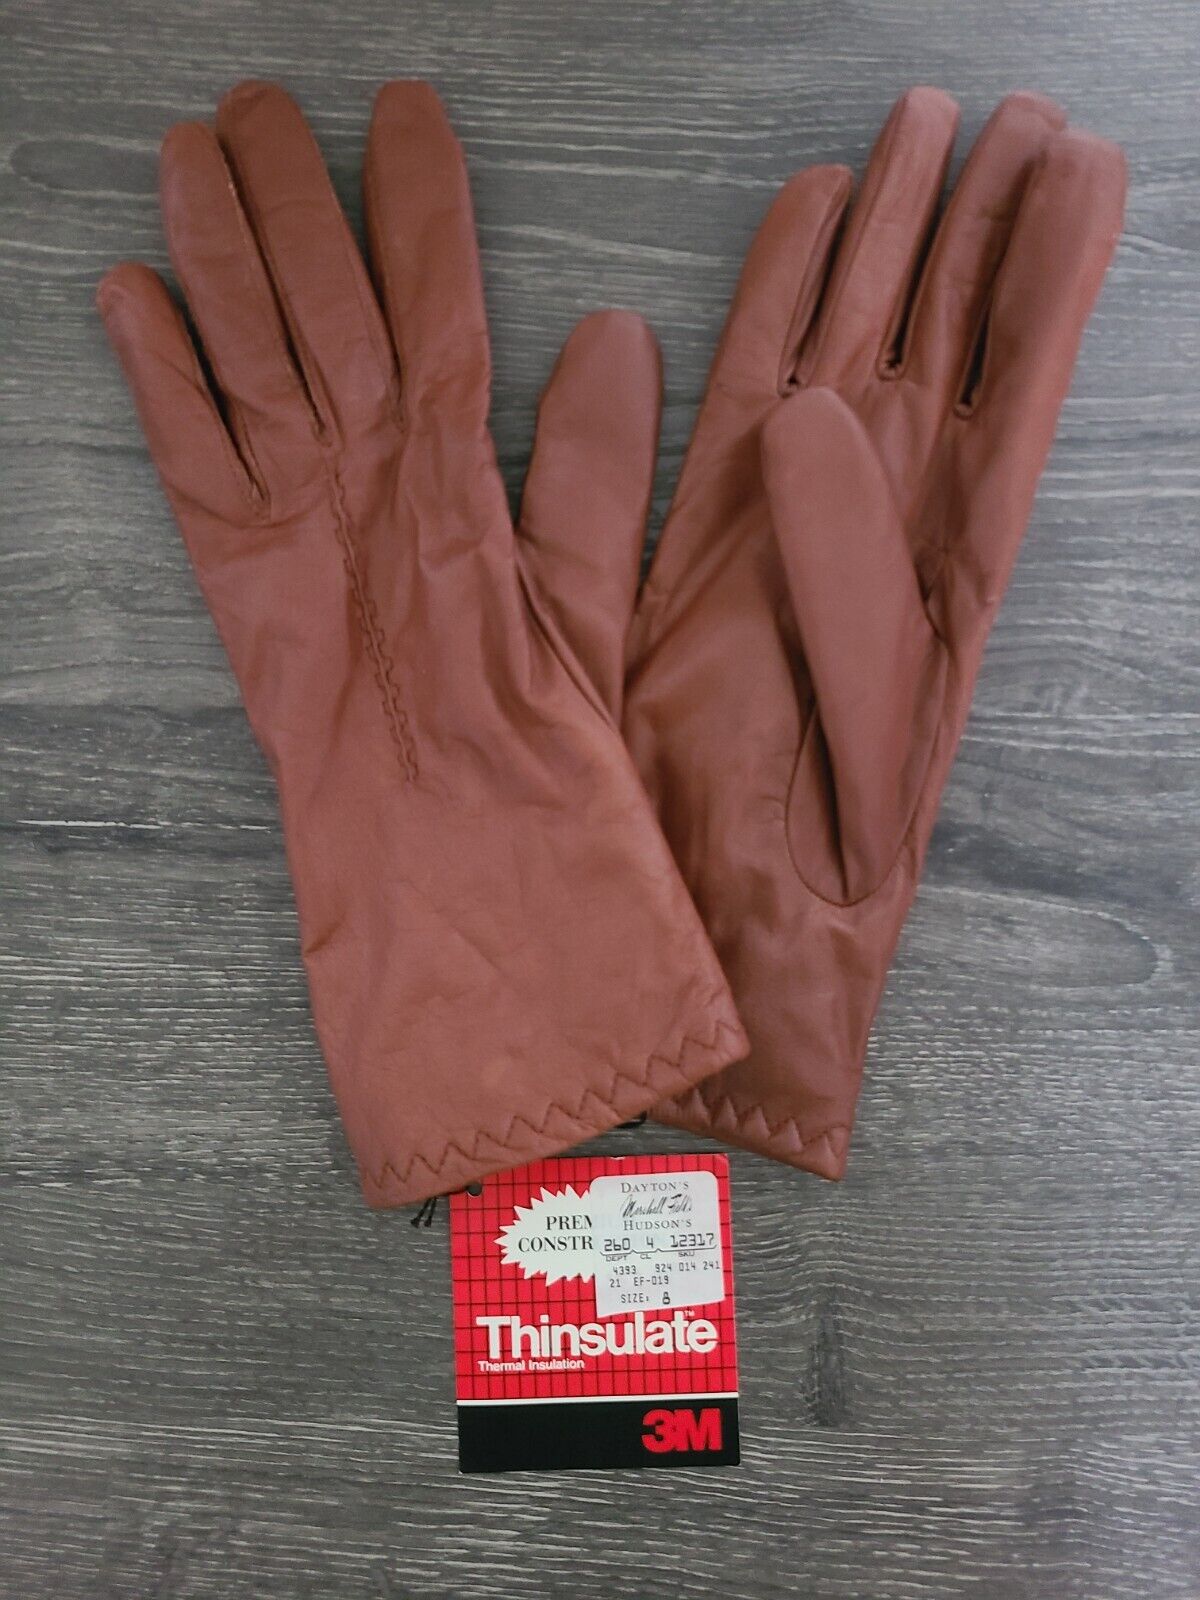 Grandoe Women's Gloves Brown Size 8 Thinsulate Lined - NOS 3M Product W/Tags